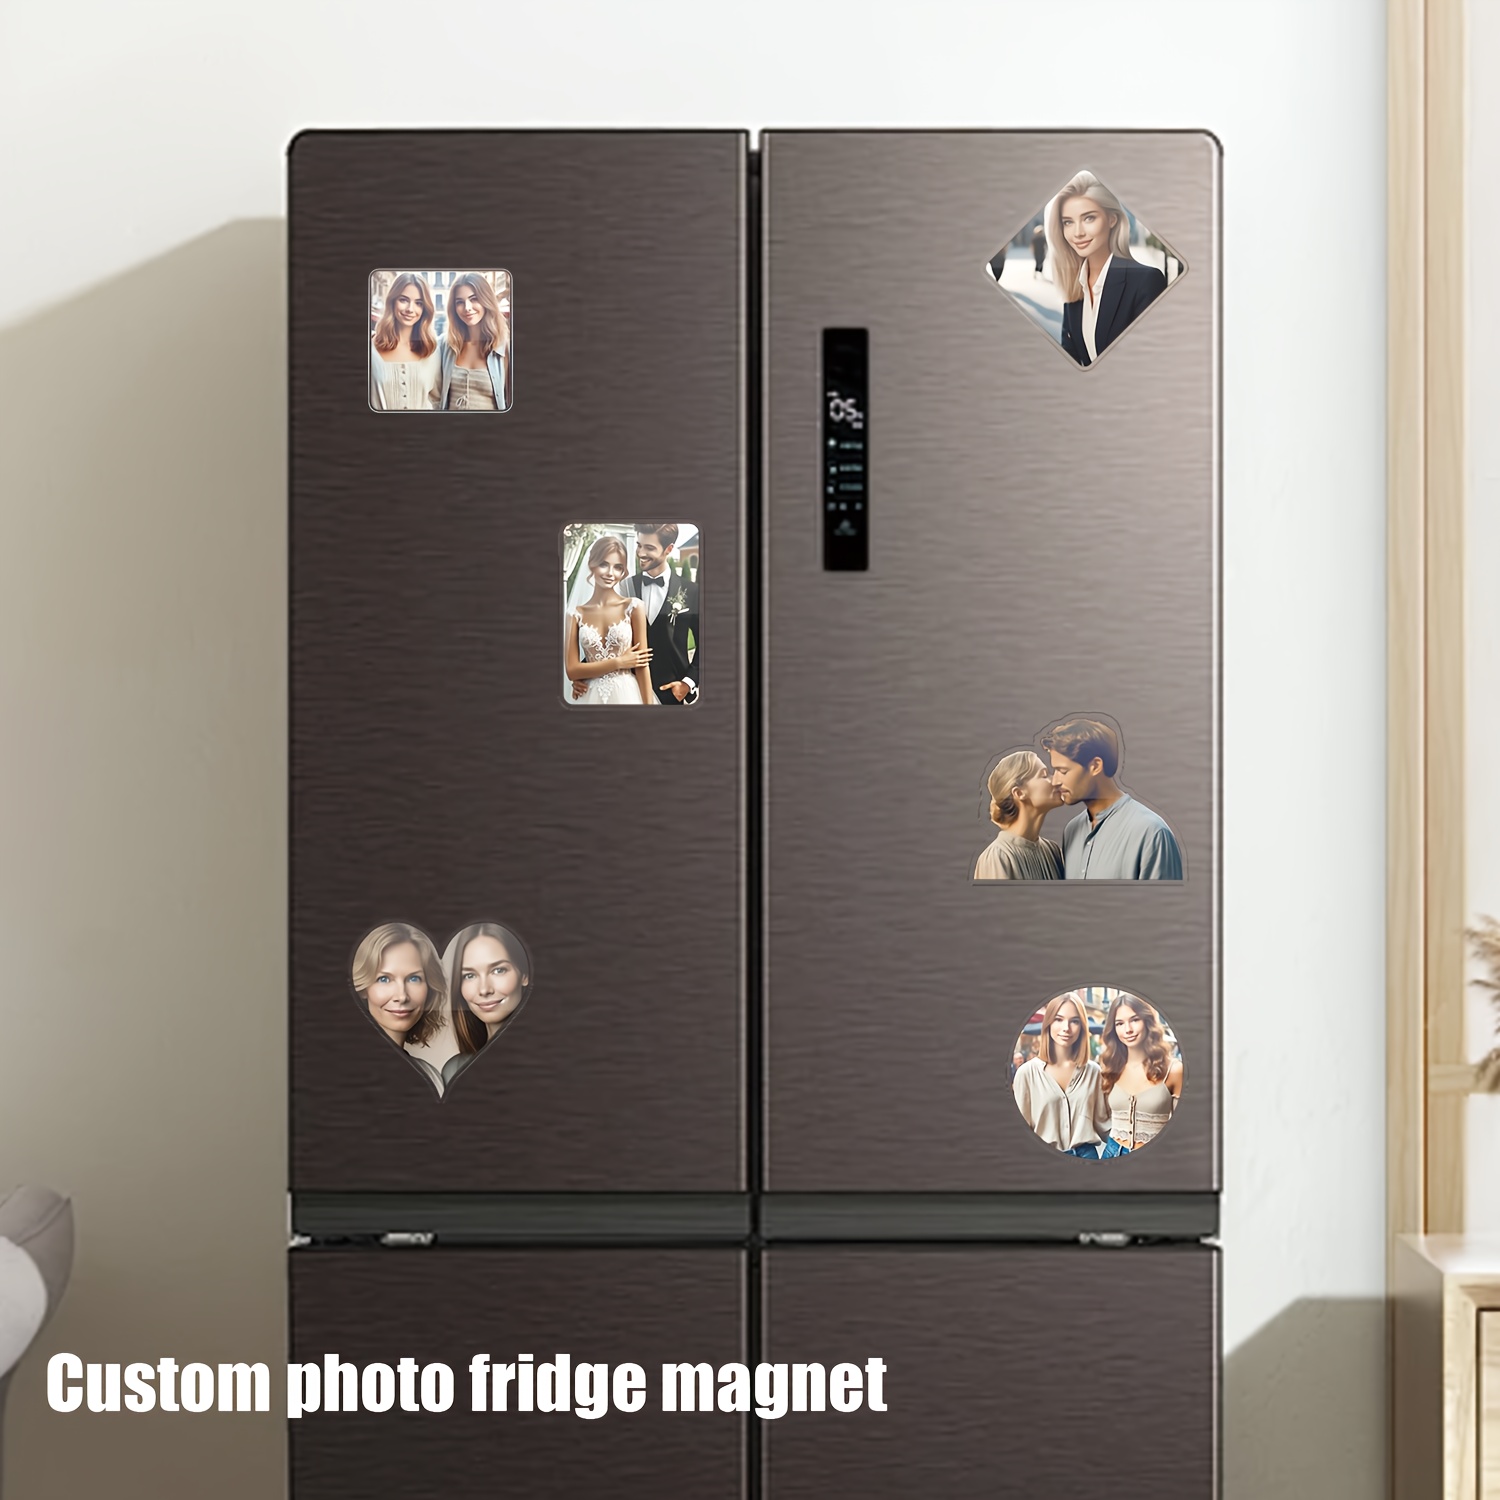 

1pc Custom Acrylic Fridge Magnet, Personalized Photo Decoration For Refrigerator, Handmade Fashionable Wall-mounted Utility Hook, Unique Keepsake For Friends, Family, Lovers - 5cm/1.97inch